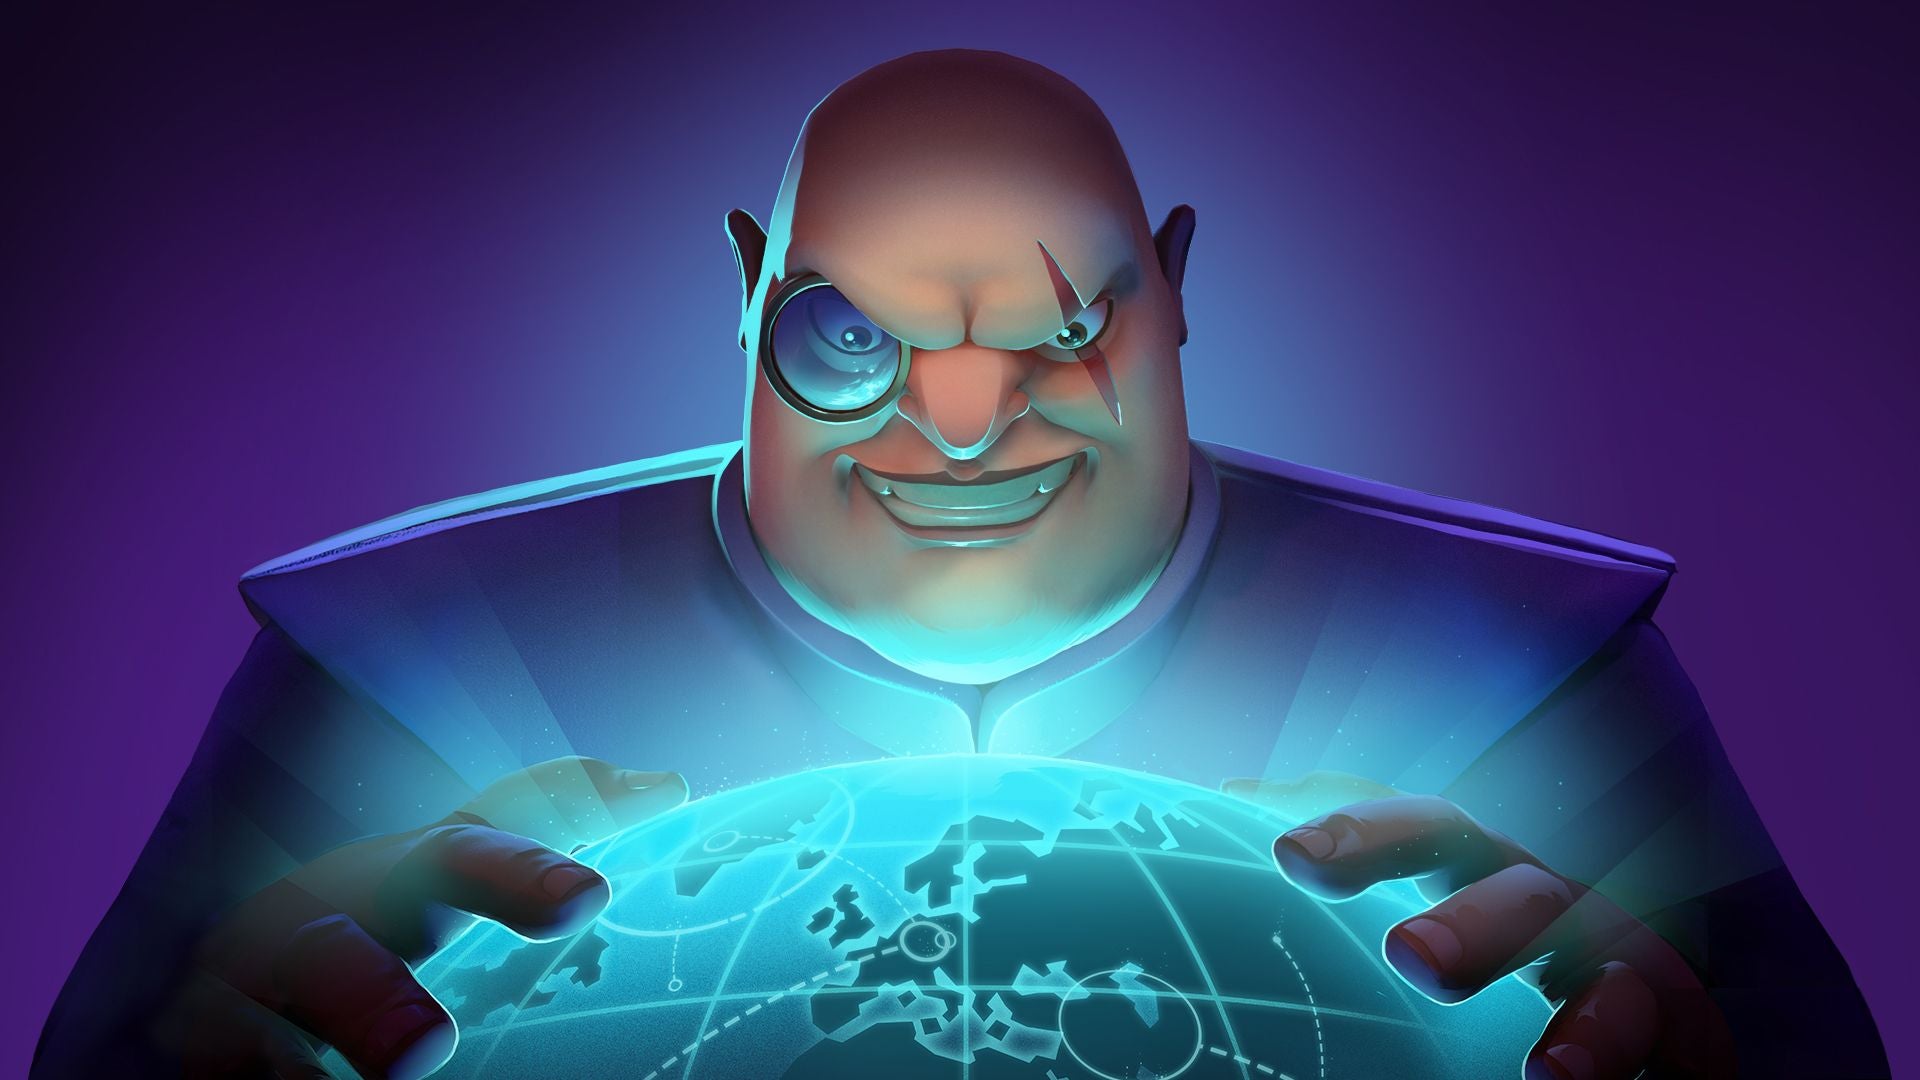 Image for Evil Genius 2 is getting a Sandbox mode, Deluxe and Collector's Edition detailed